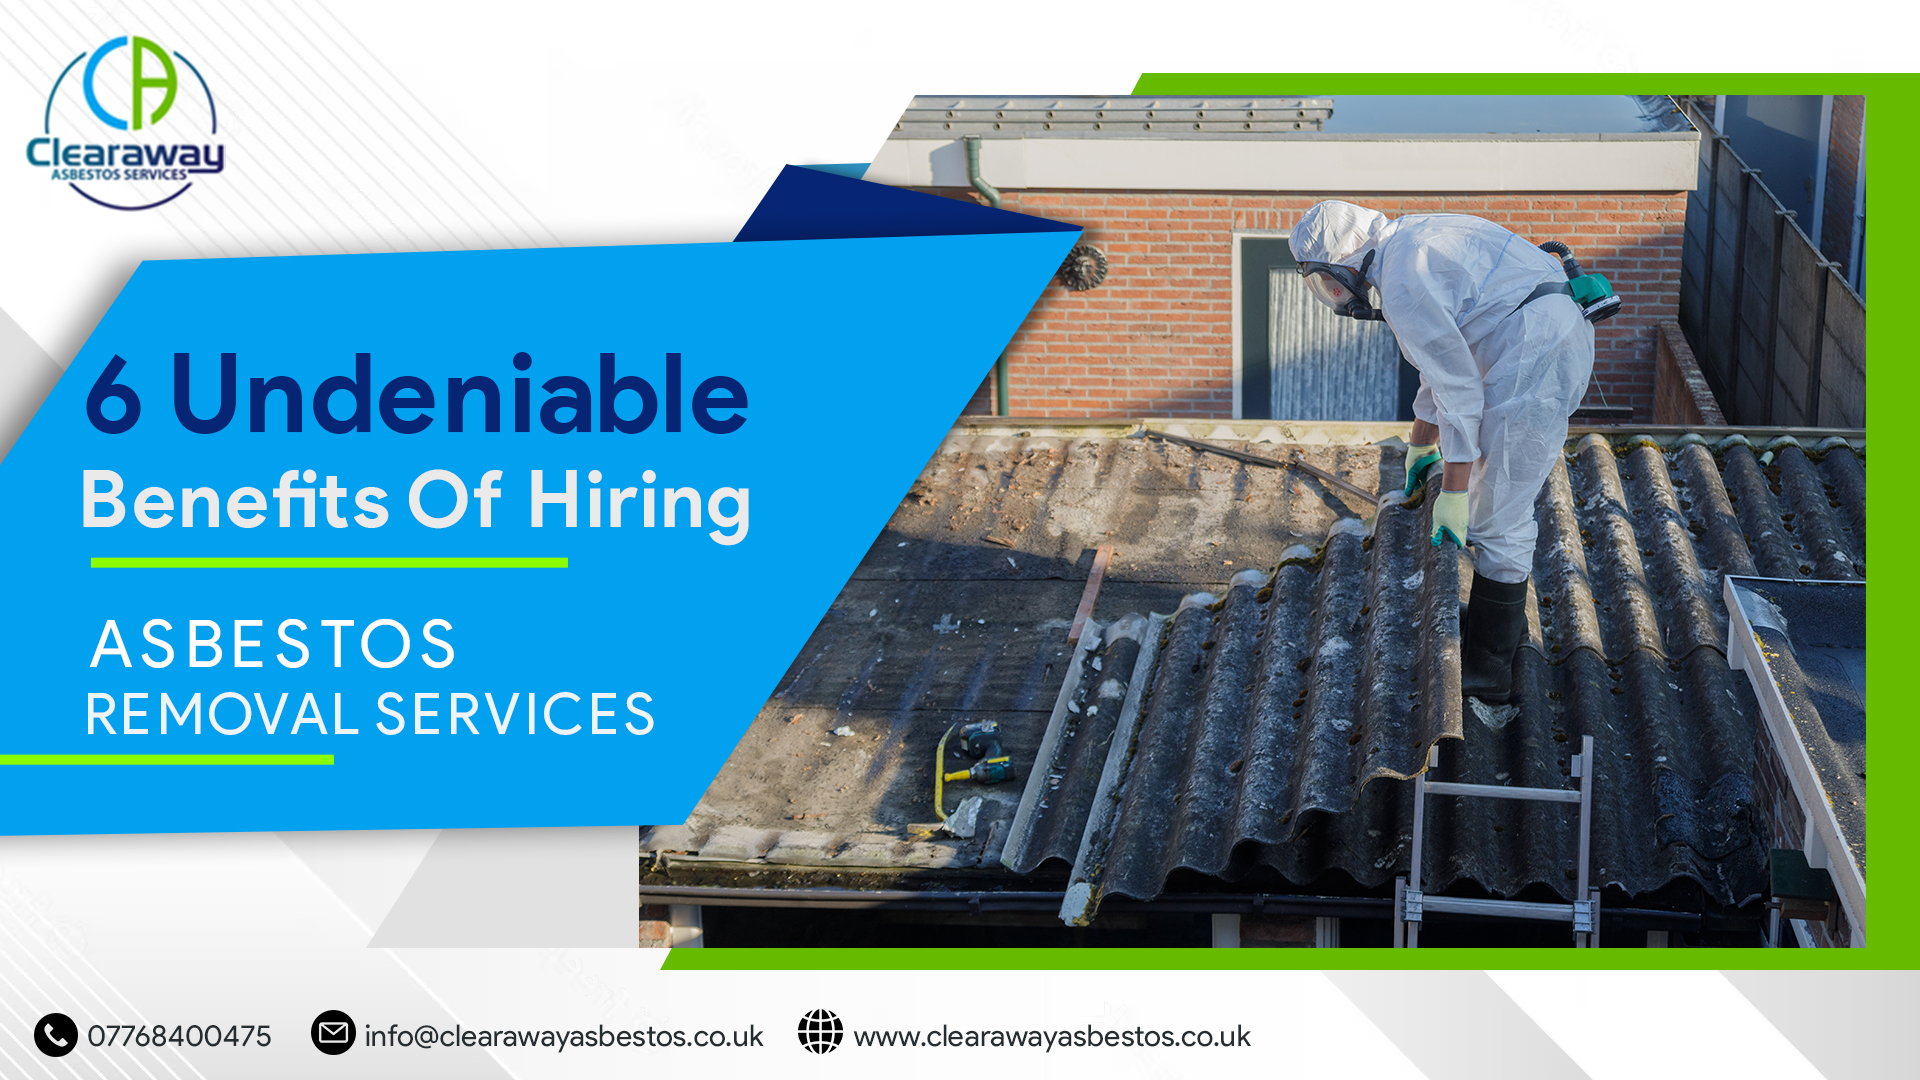 6 Undeniable Benefits Of Hiring Asbestos Removal Services